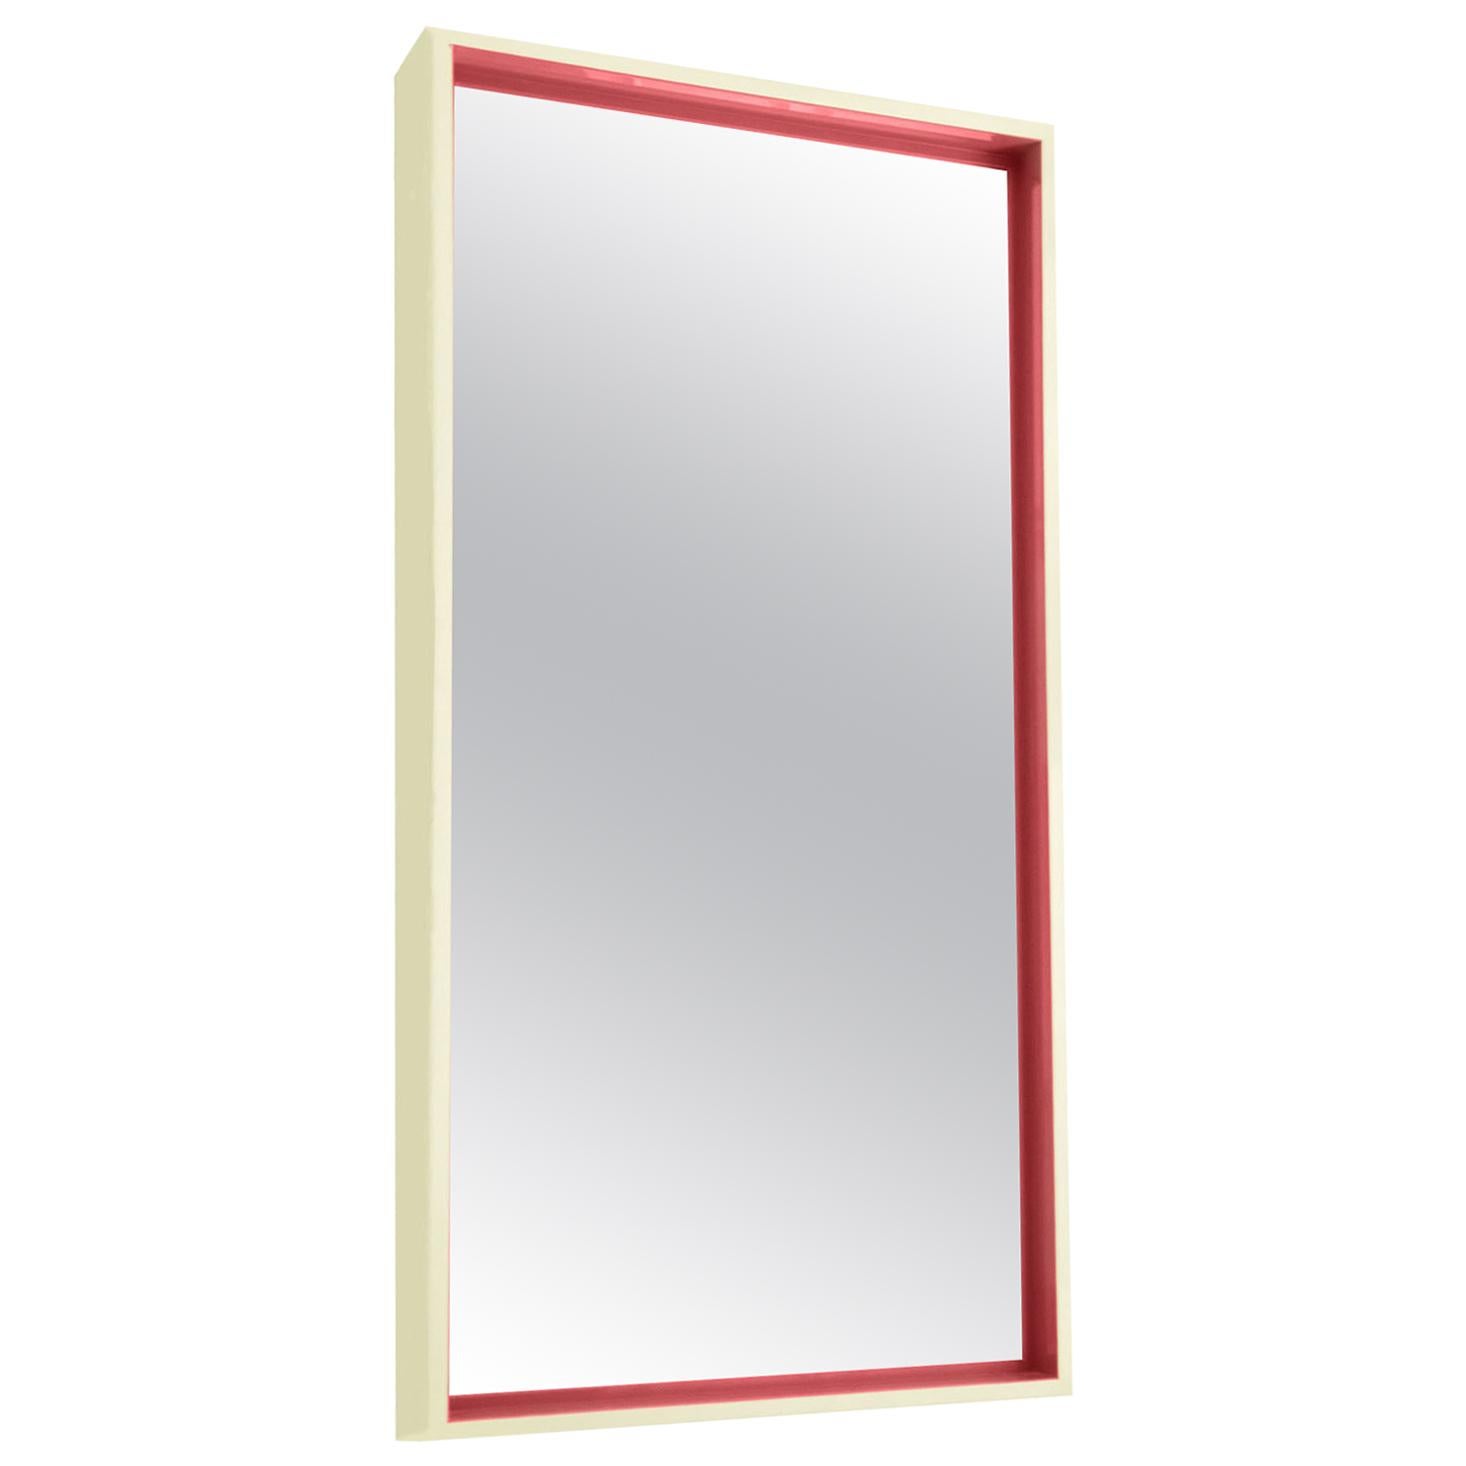 Two-Tone Glossy Lacquer Beveled Shadow Box Mirror Hardwood Maple Frame Custom For Sale